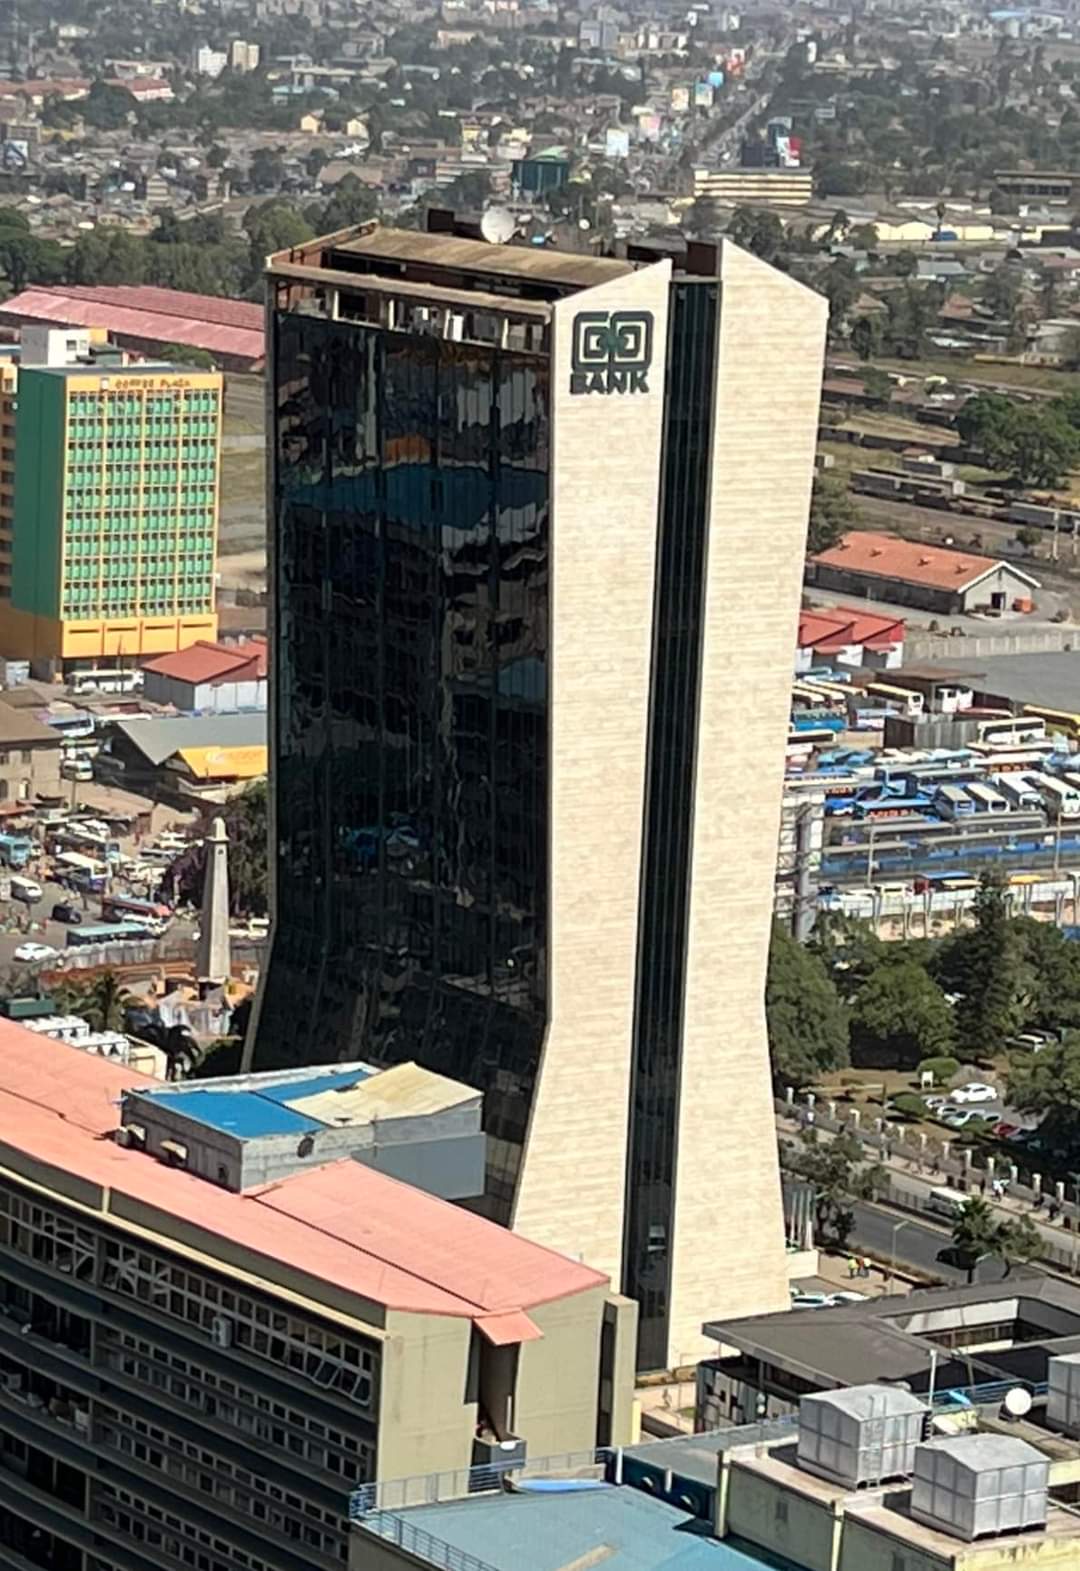 Co-op Bank now Second Most Valuable Bank at Nairobi Stock Exchange